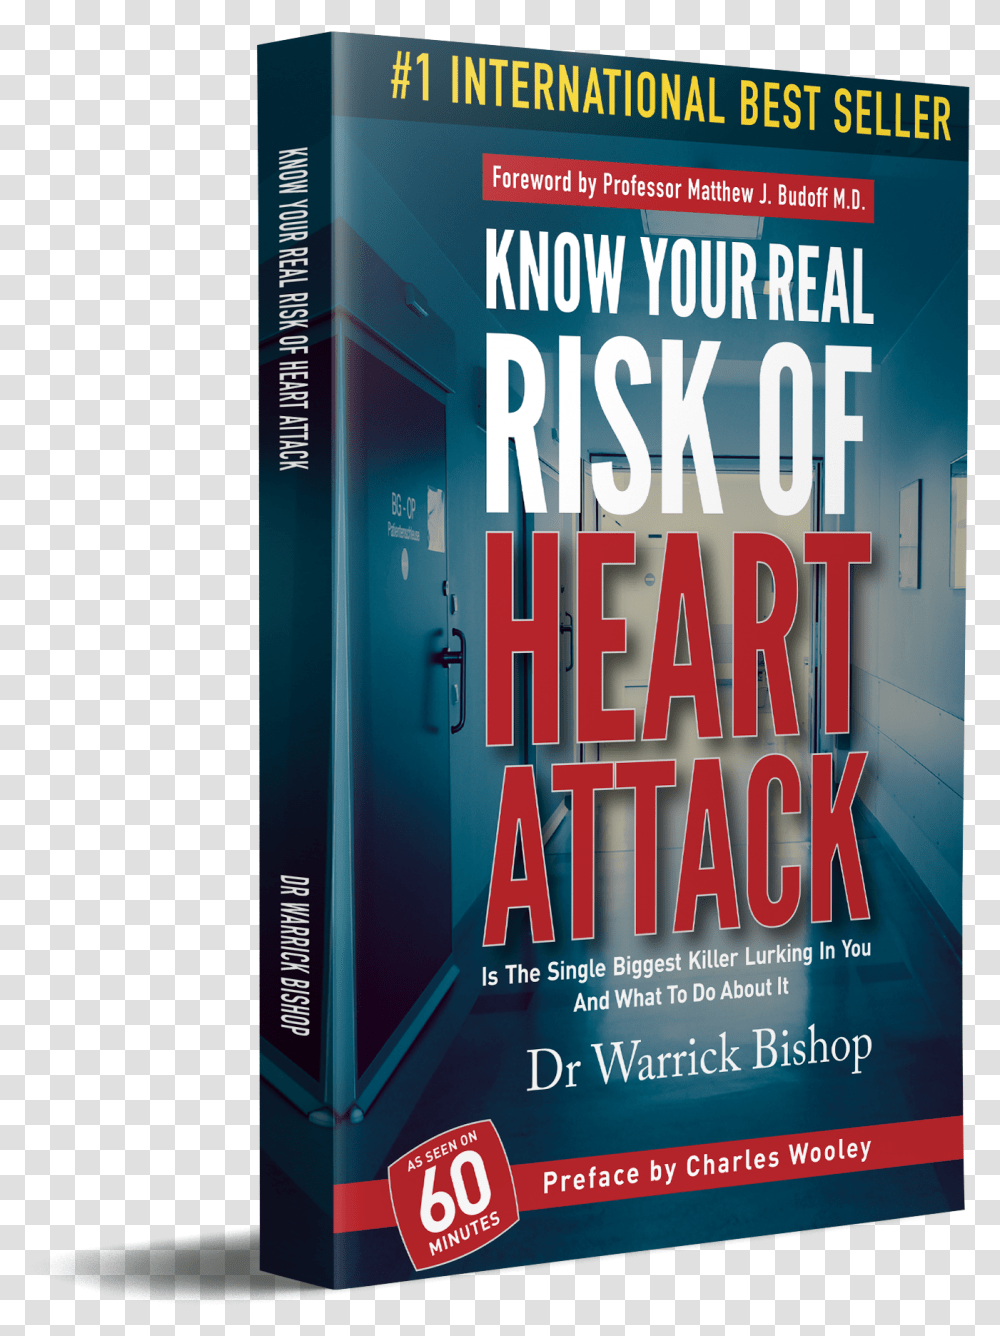 Real Heart Book Cover, Poster, Advertisement, Flyer, Paper Transparent Png